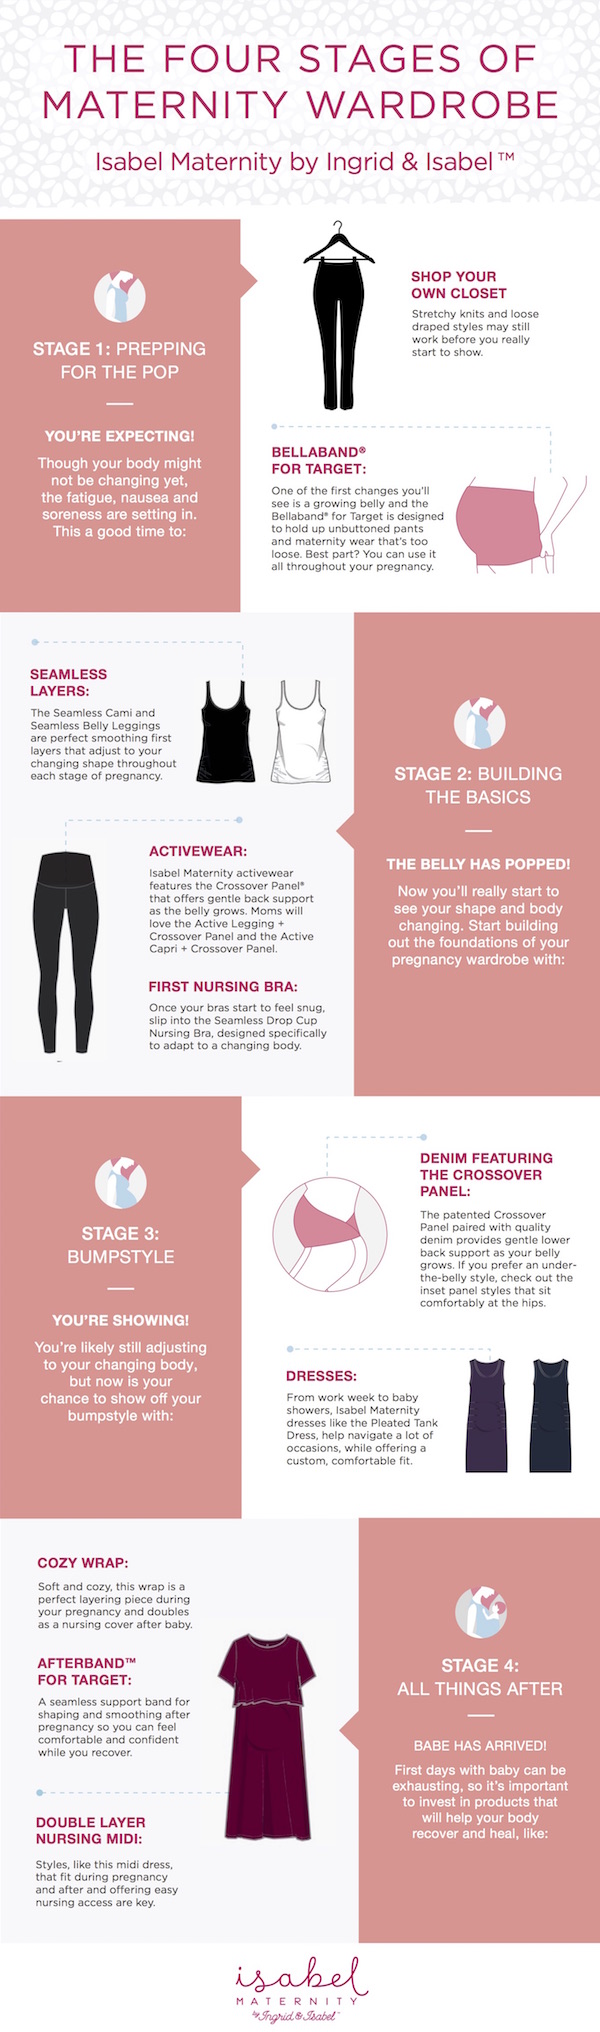 The Four Stages of Maternity Wardrobe graphic